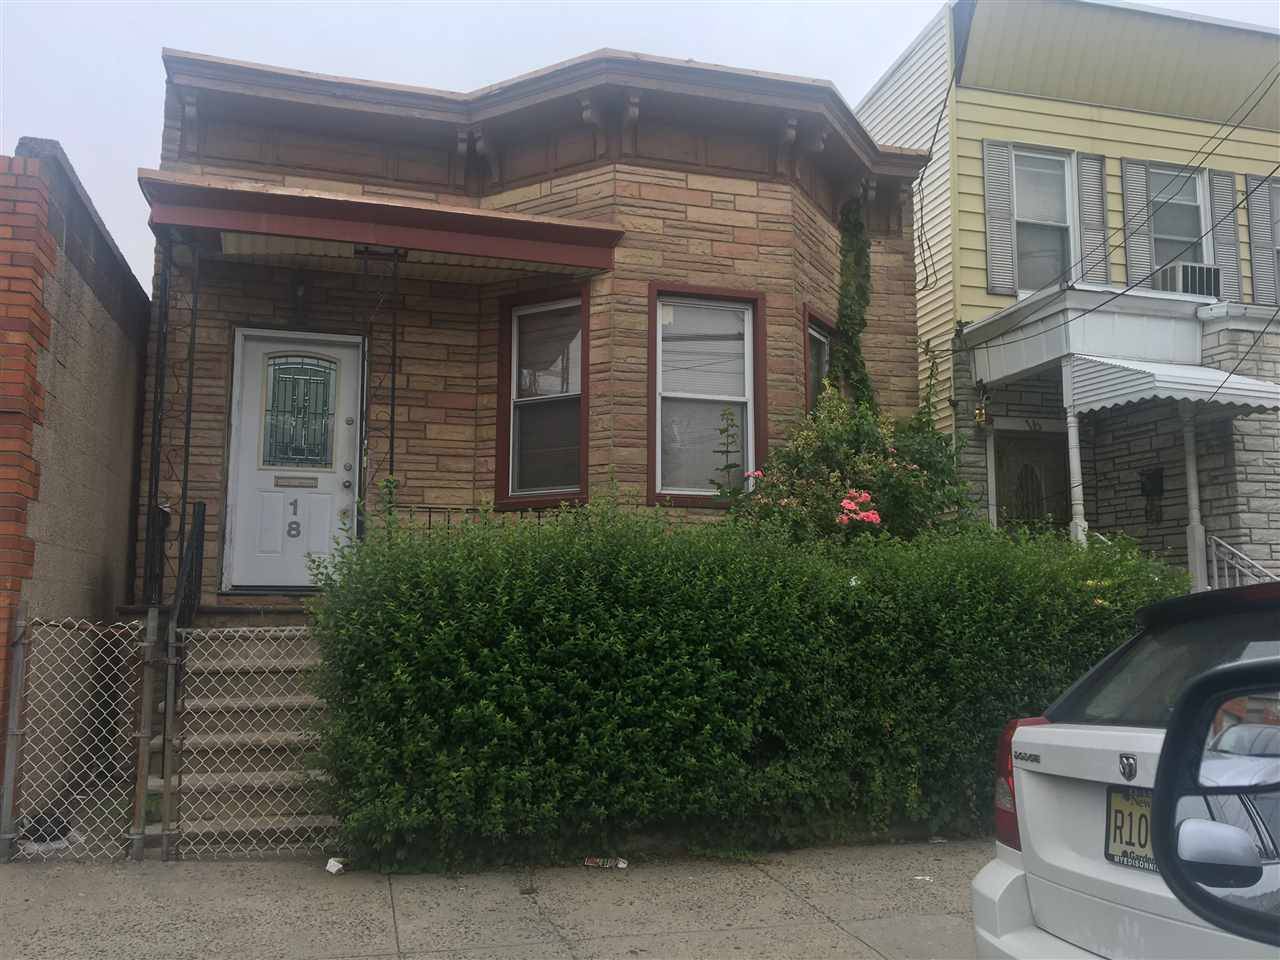 Remarkable investor opportunity - 4 BR New Jersey